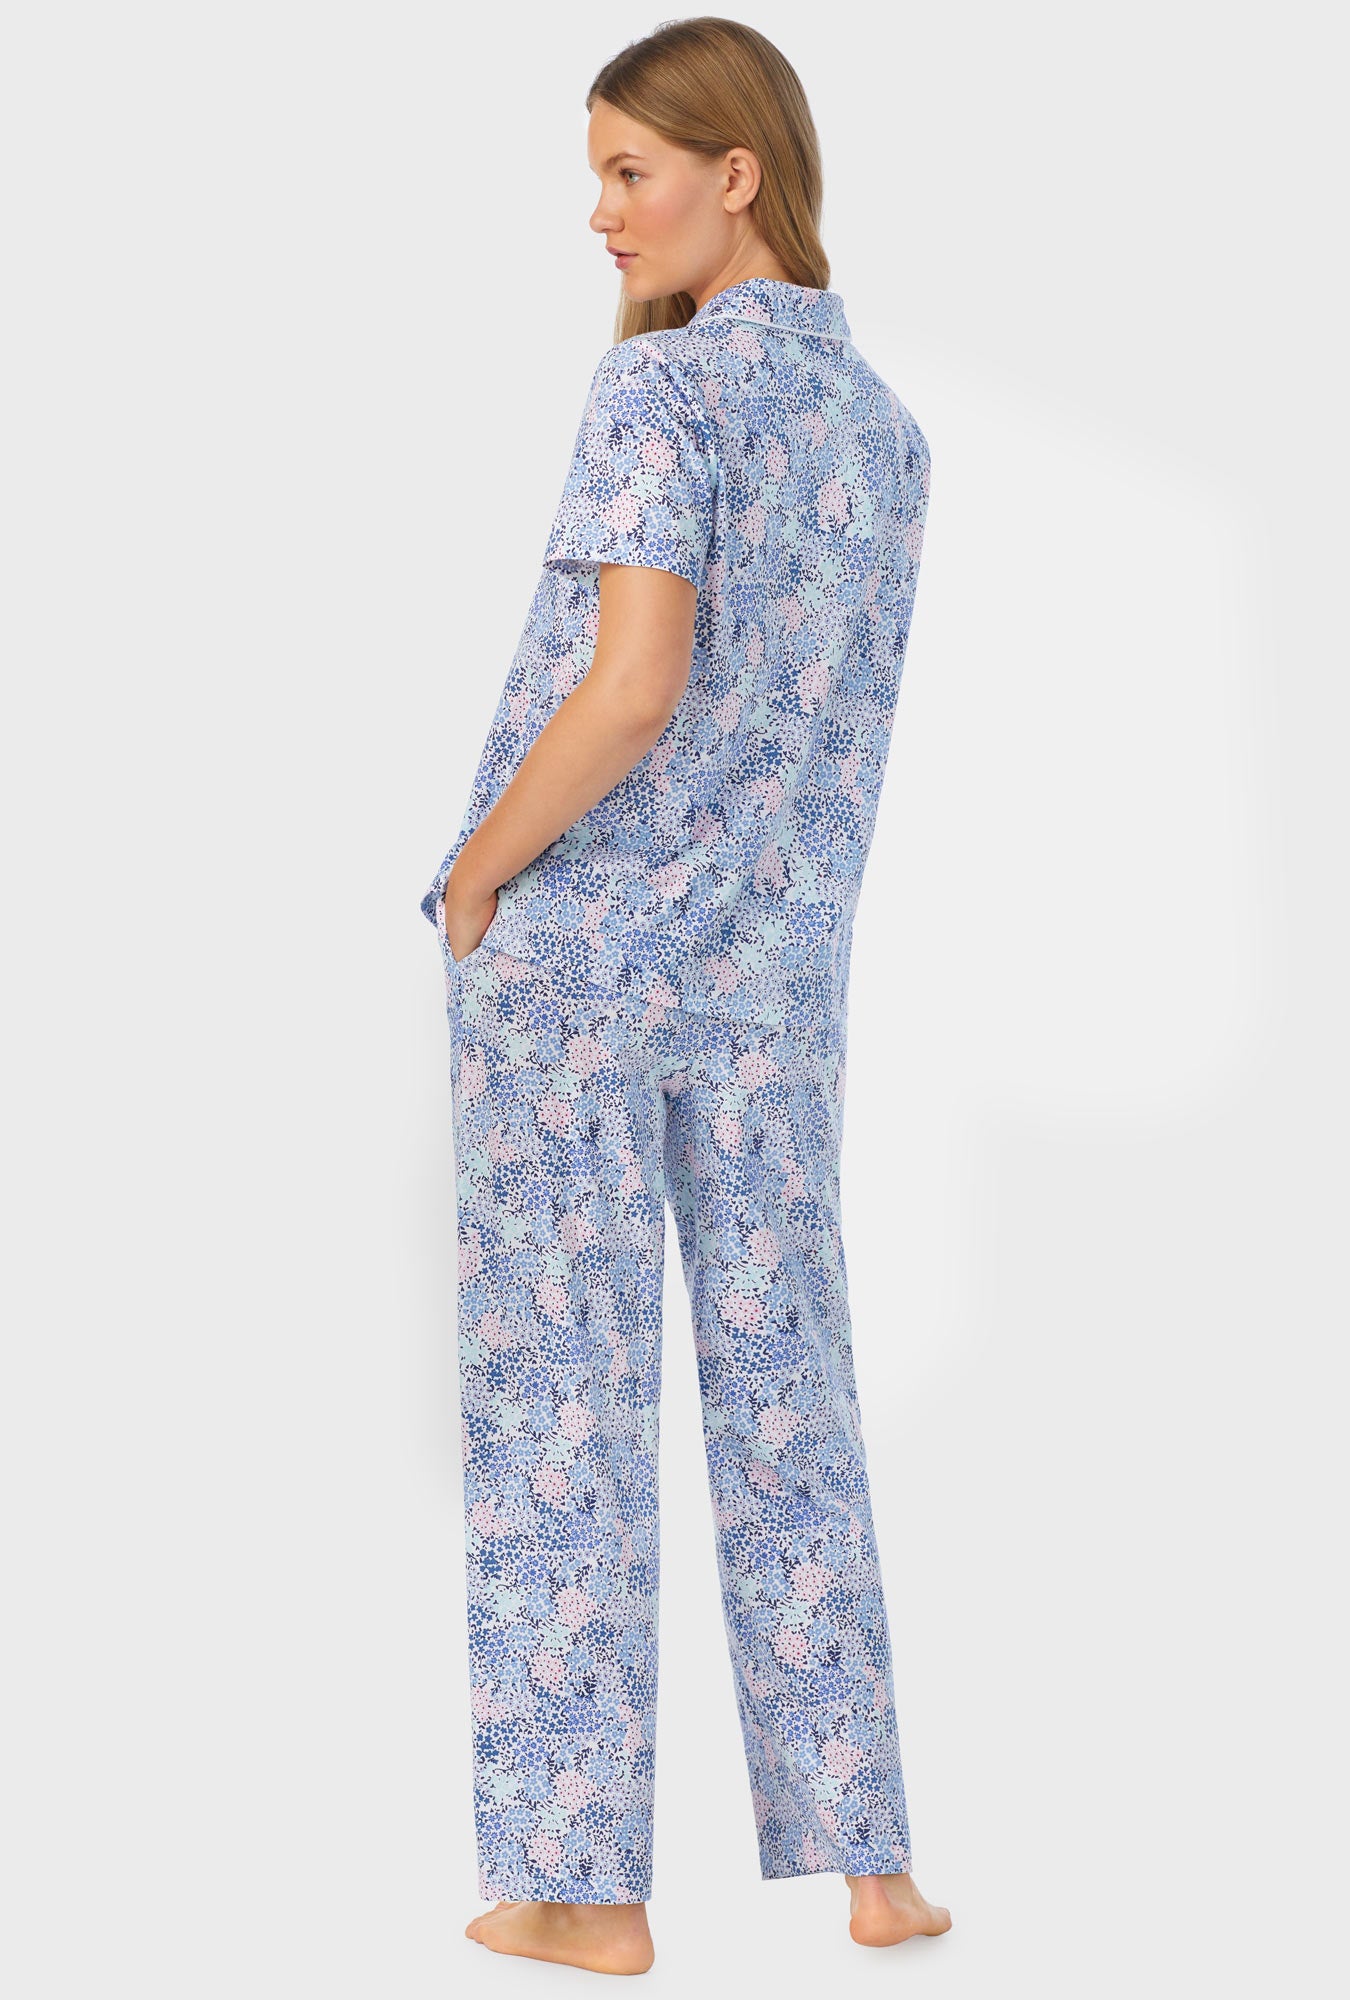 A lady wearing a short sleeve long pajama set with midnight dream print.